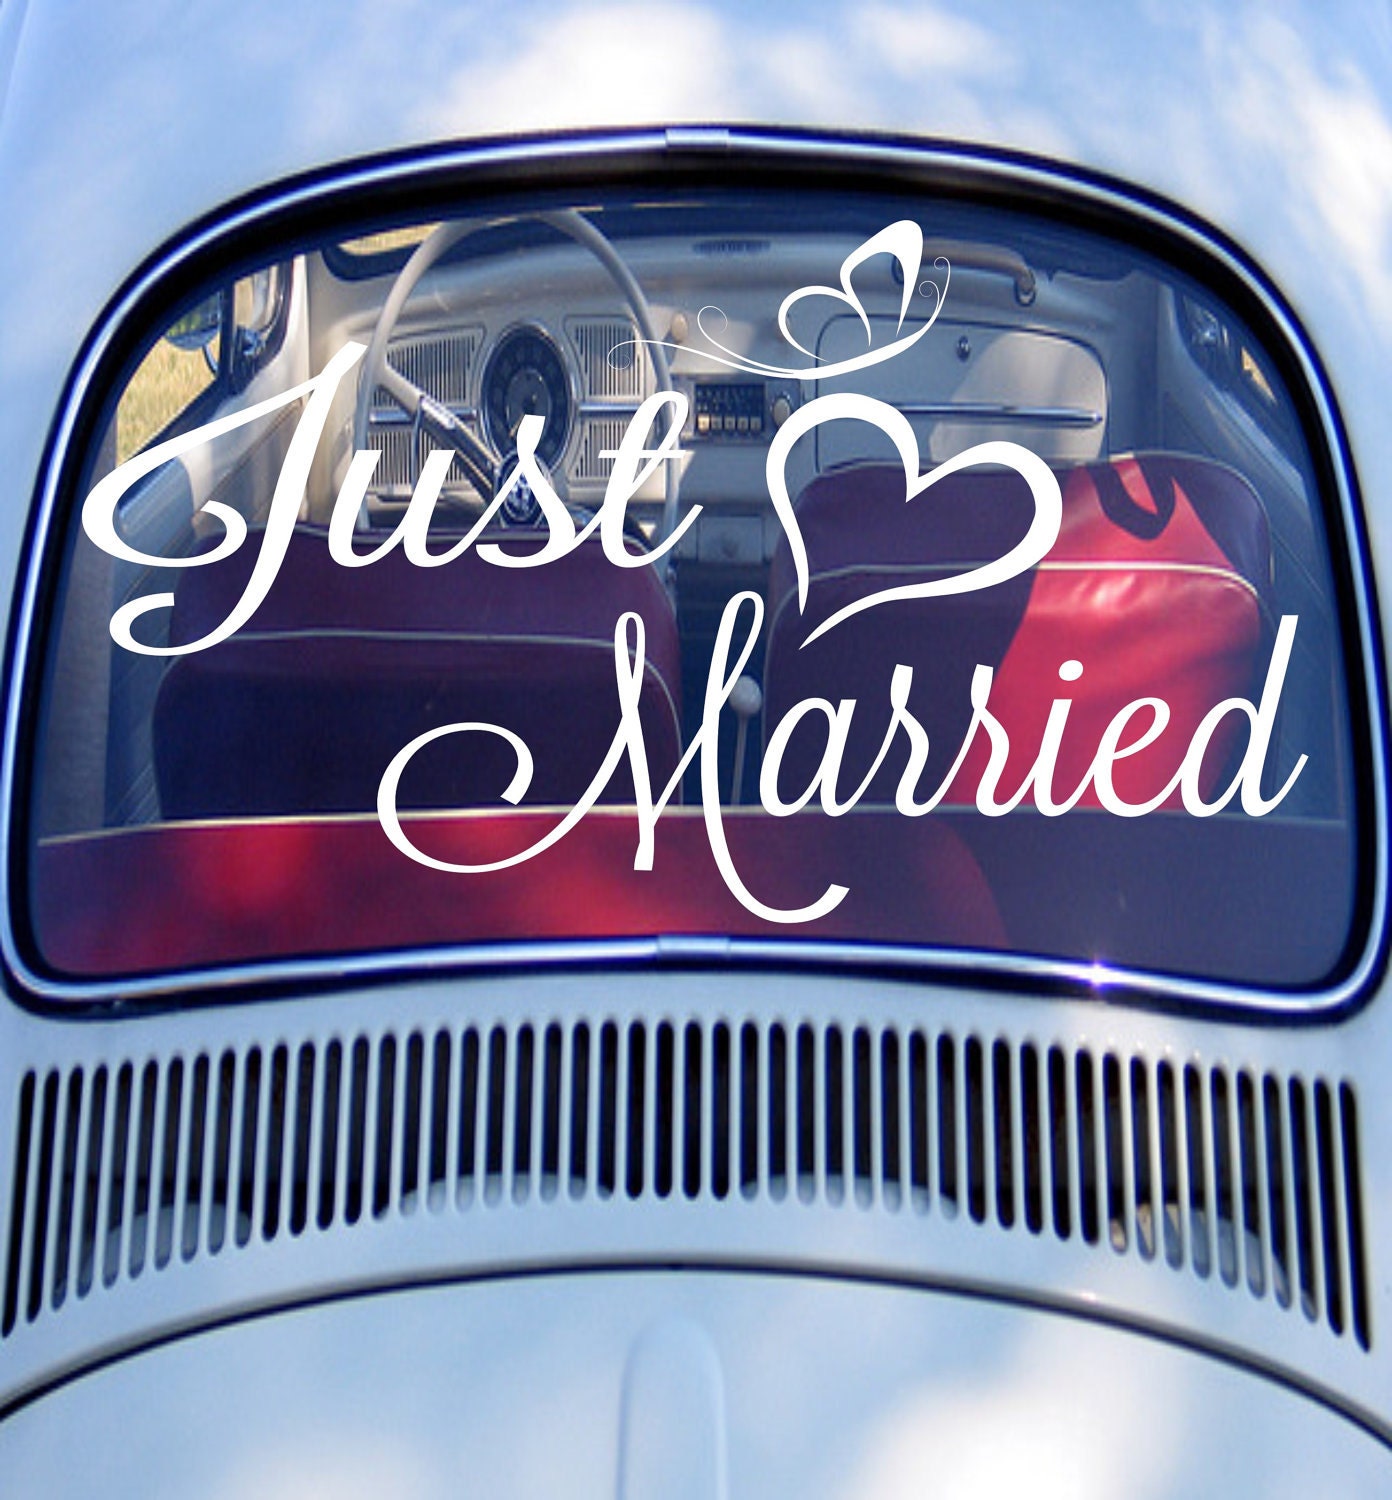 CUNYA Just Married Car Decorations Sticker, Vinyl Wedding Car Window Decal  Sign for Car, Window Cling Sticker for Wedding Things Wall Art Home Decor